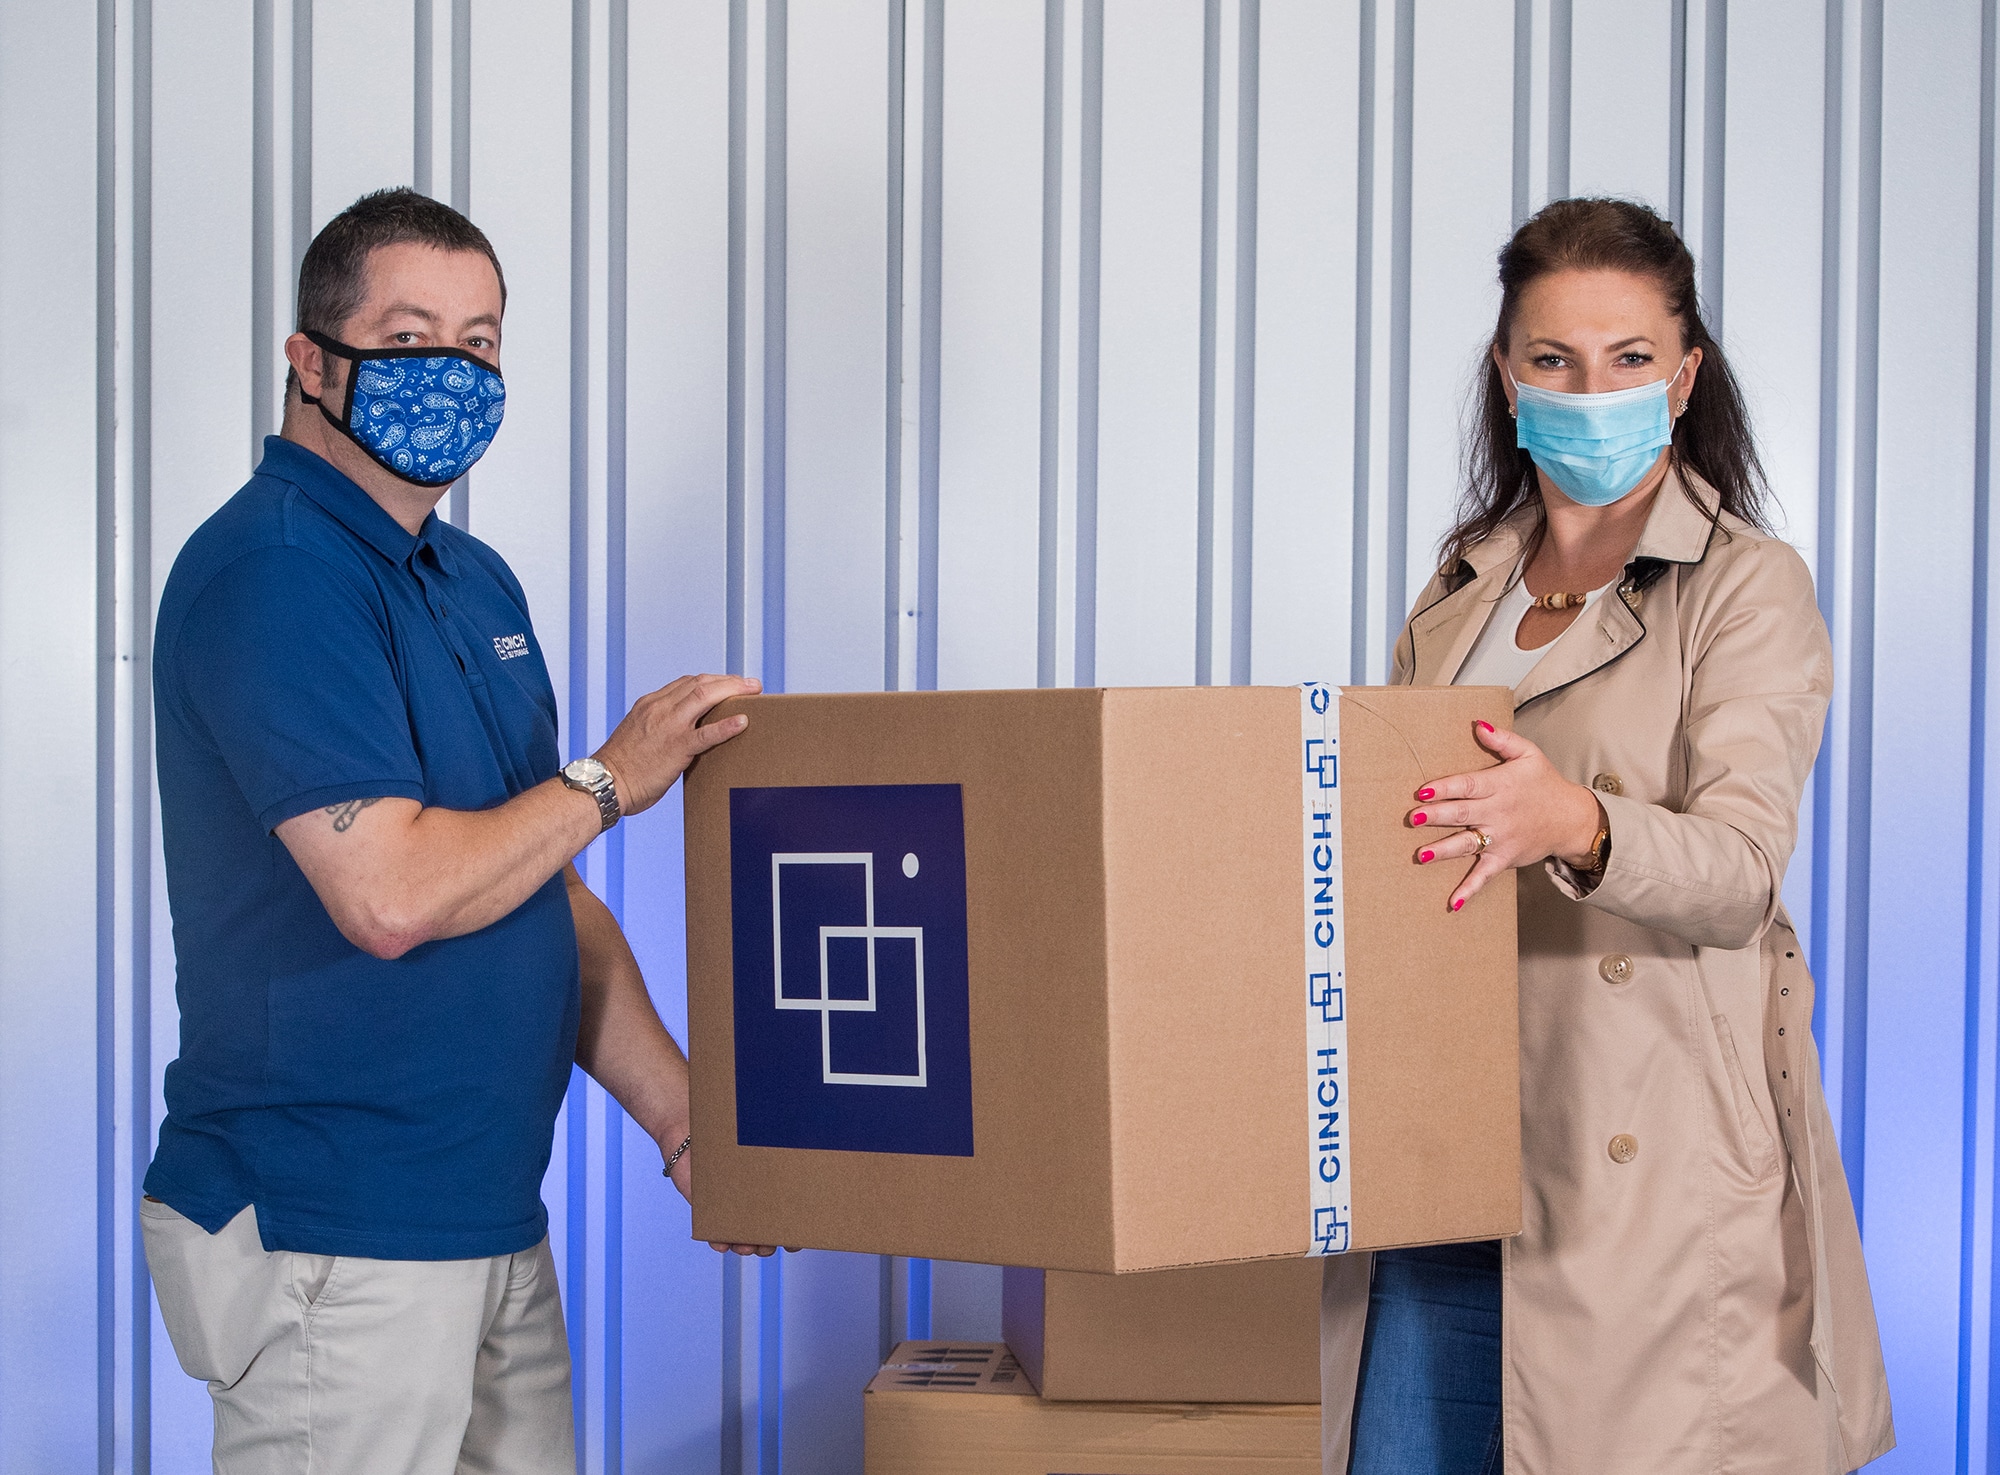 A man and a woman wearing a face mask holding a cardboard box inside a storage unit